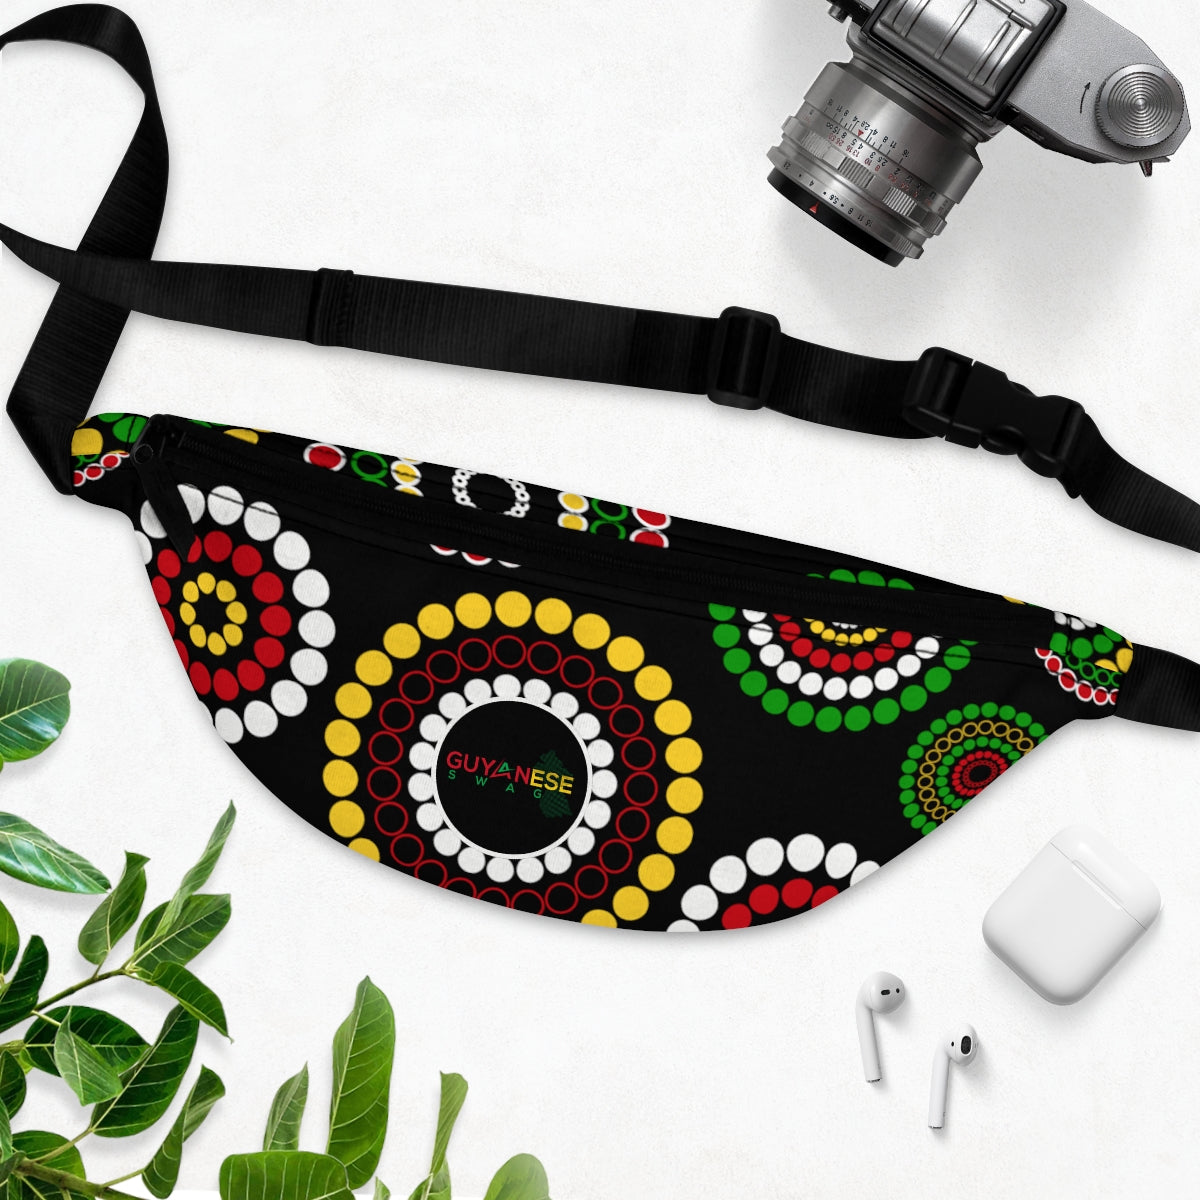 Guyanese Swag Ice Gold Green Floral Fanny Pack.